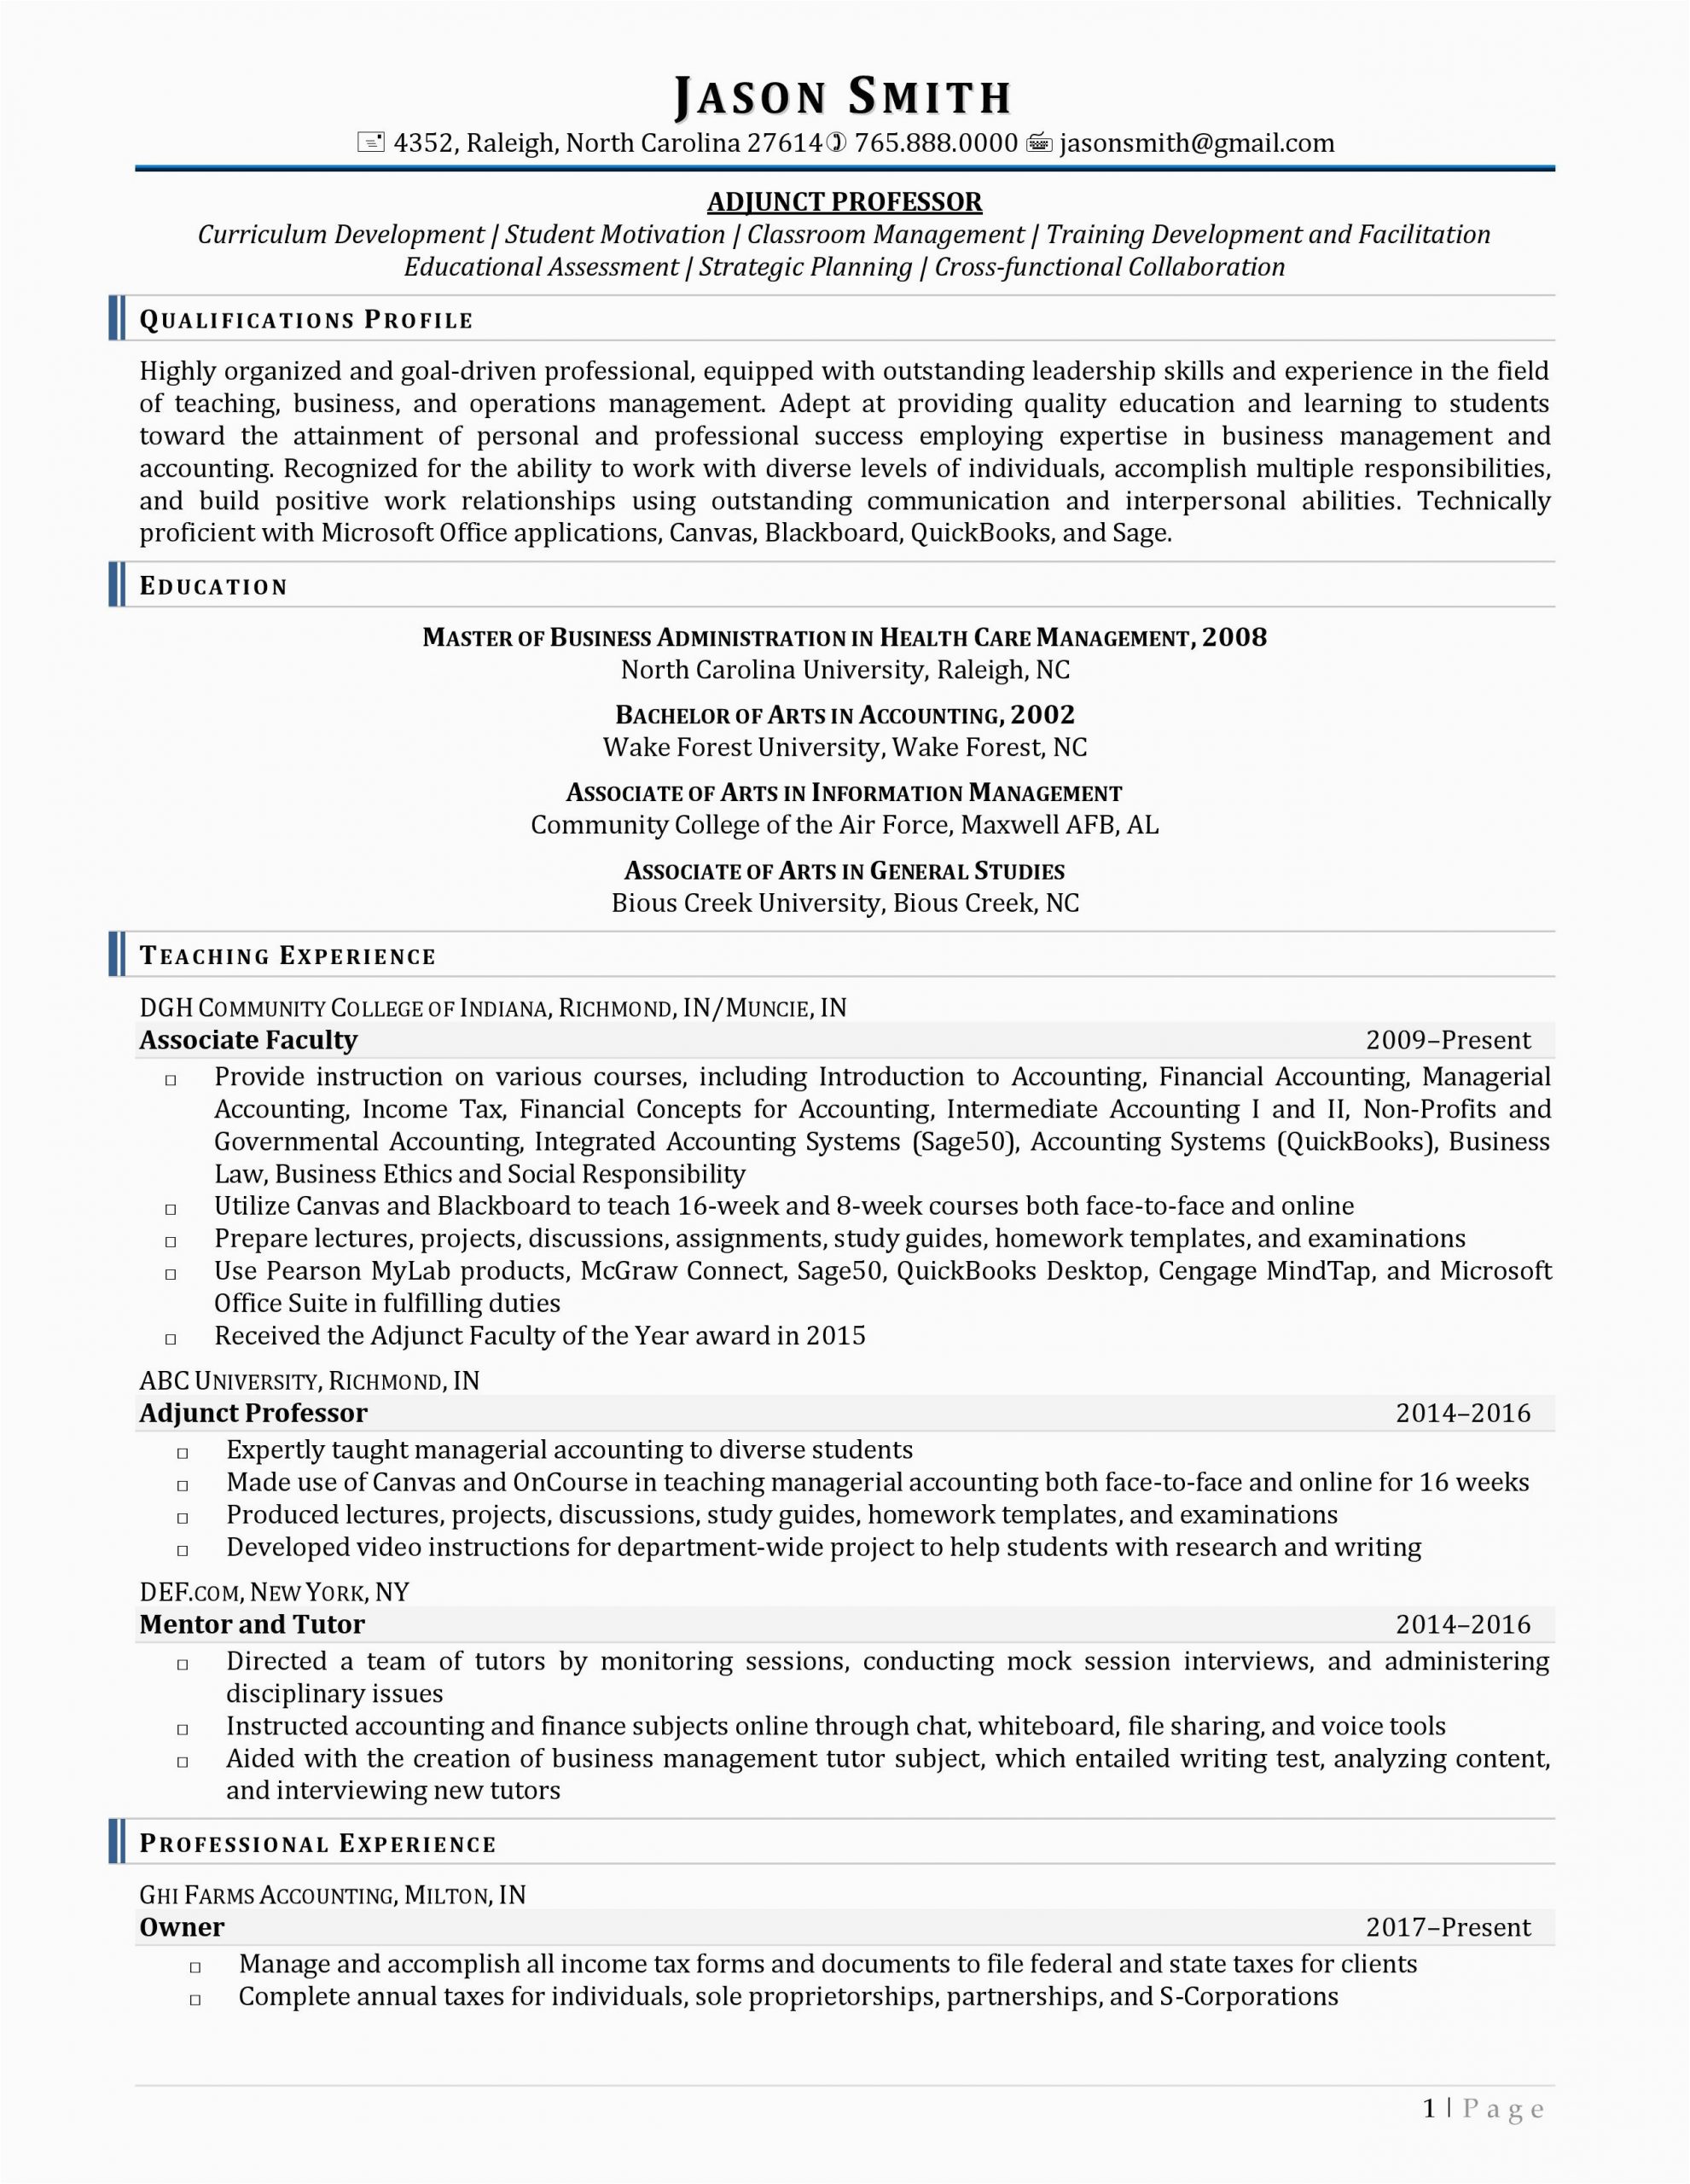 Sample Resume for One Long Term Job Long Resume why Resume Length Matters In Your Job Search